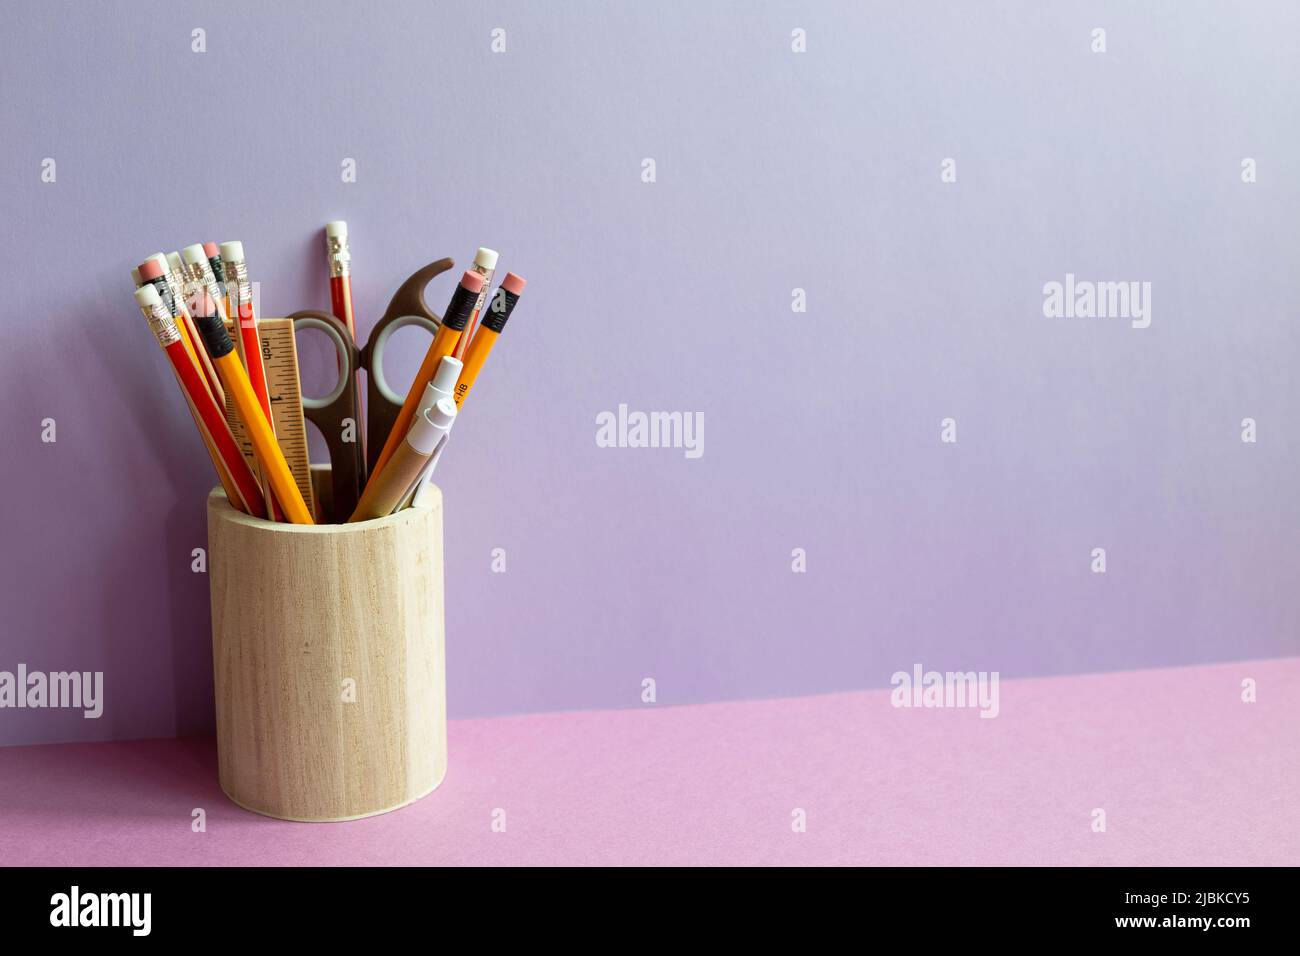 Pencils and various stationery in wooden holder on purple desk. purple wall background Stock Photo